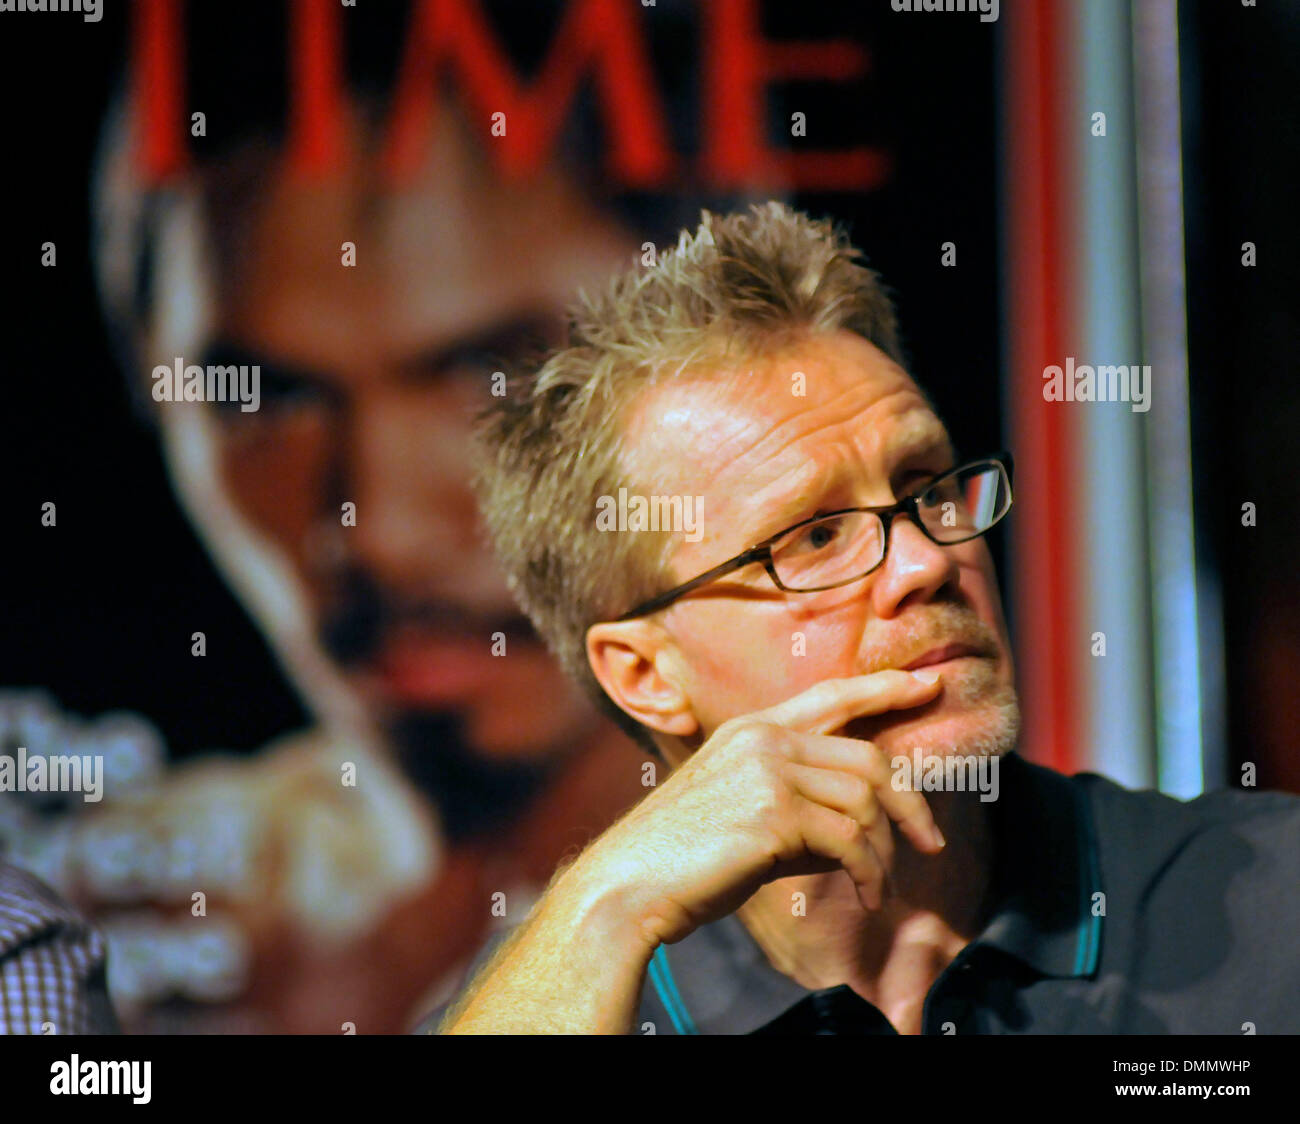 Nov 11, 2009 - Las Vegas, Nevada, USA -  Manny Pacquiao's trainer FREDDIE ROACH during the final news conference at the MGM Grand before Pacquiao's WBO welterweight championship bout against  Miguel Cotto on Saturday, Nov. 14, 2009 at the MGM Grand Garden Arena. (Credit Image: © David Becker/ZUMApress.com) Stock Photo